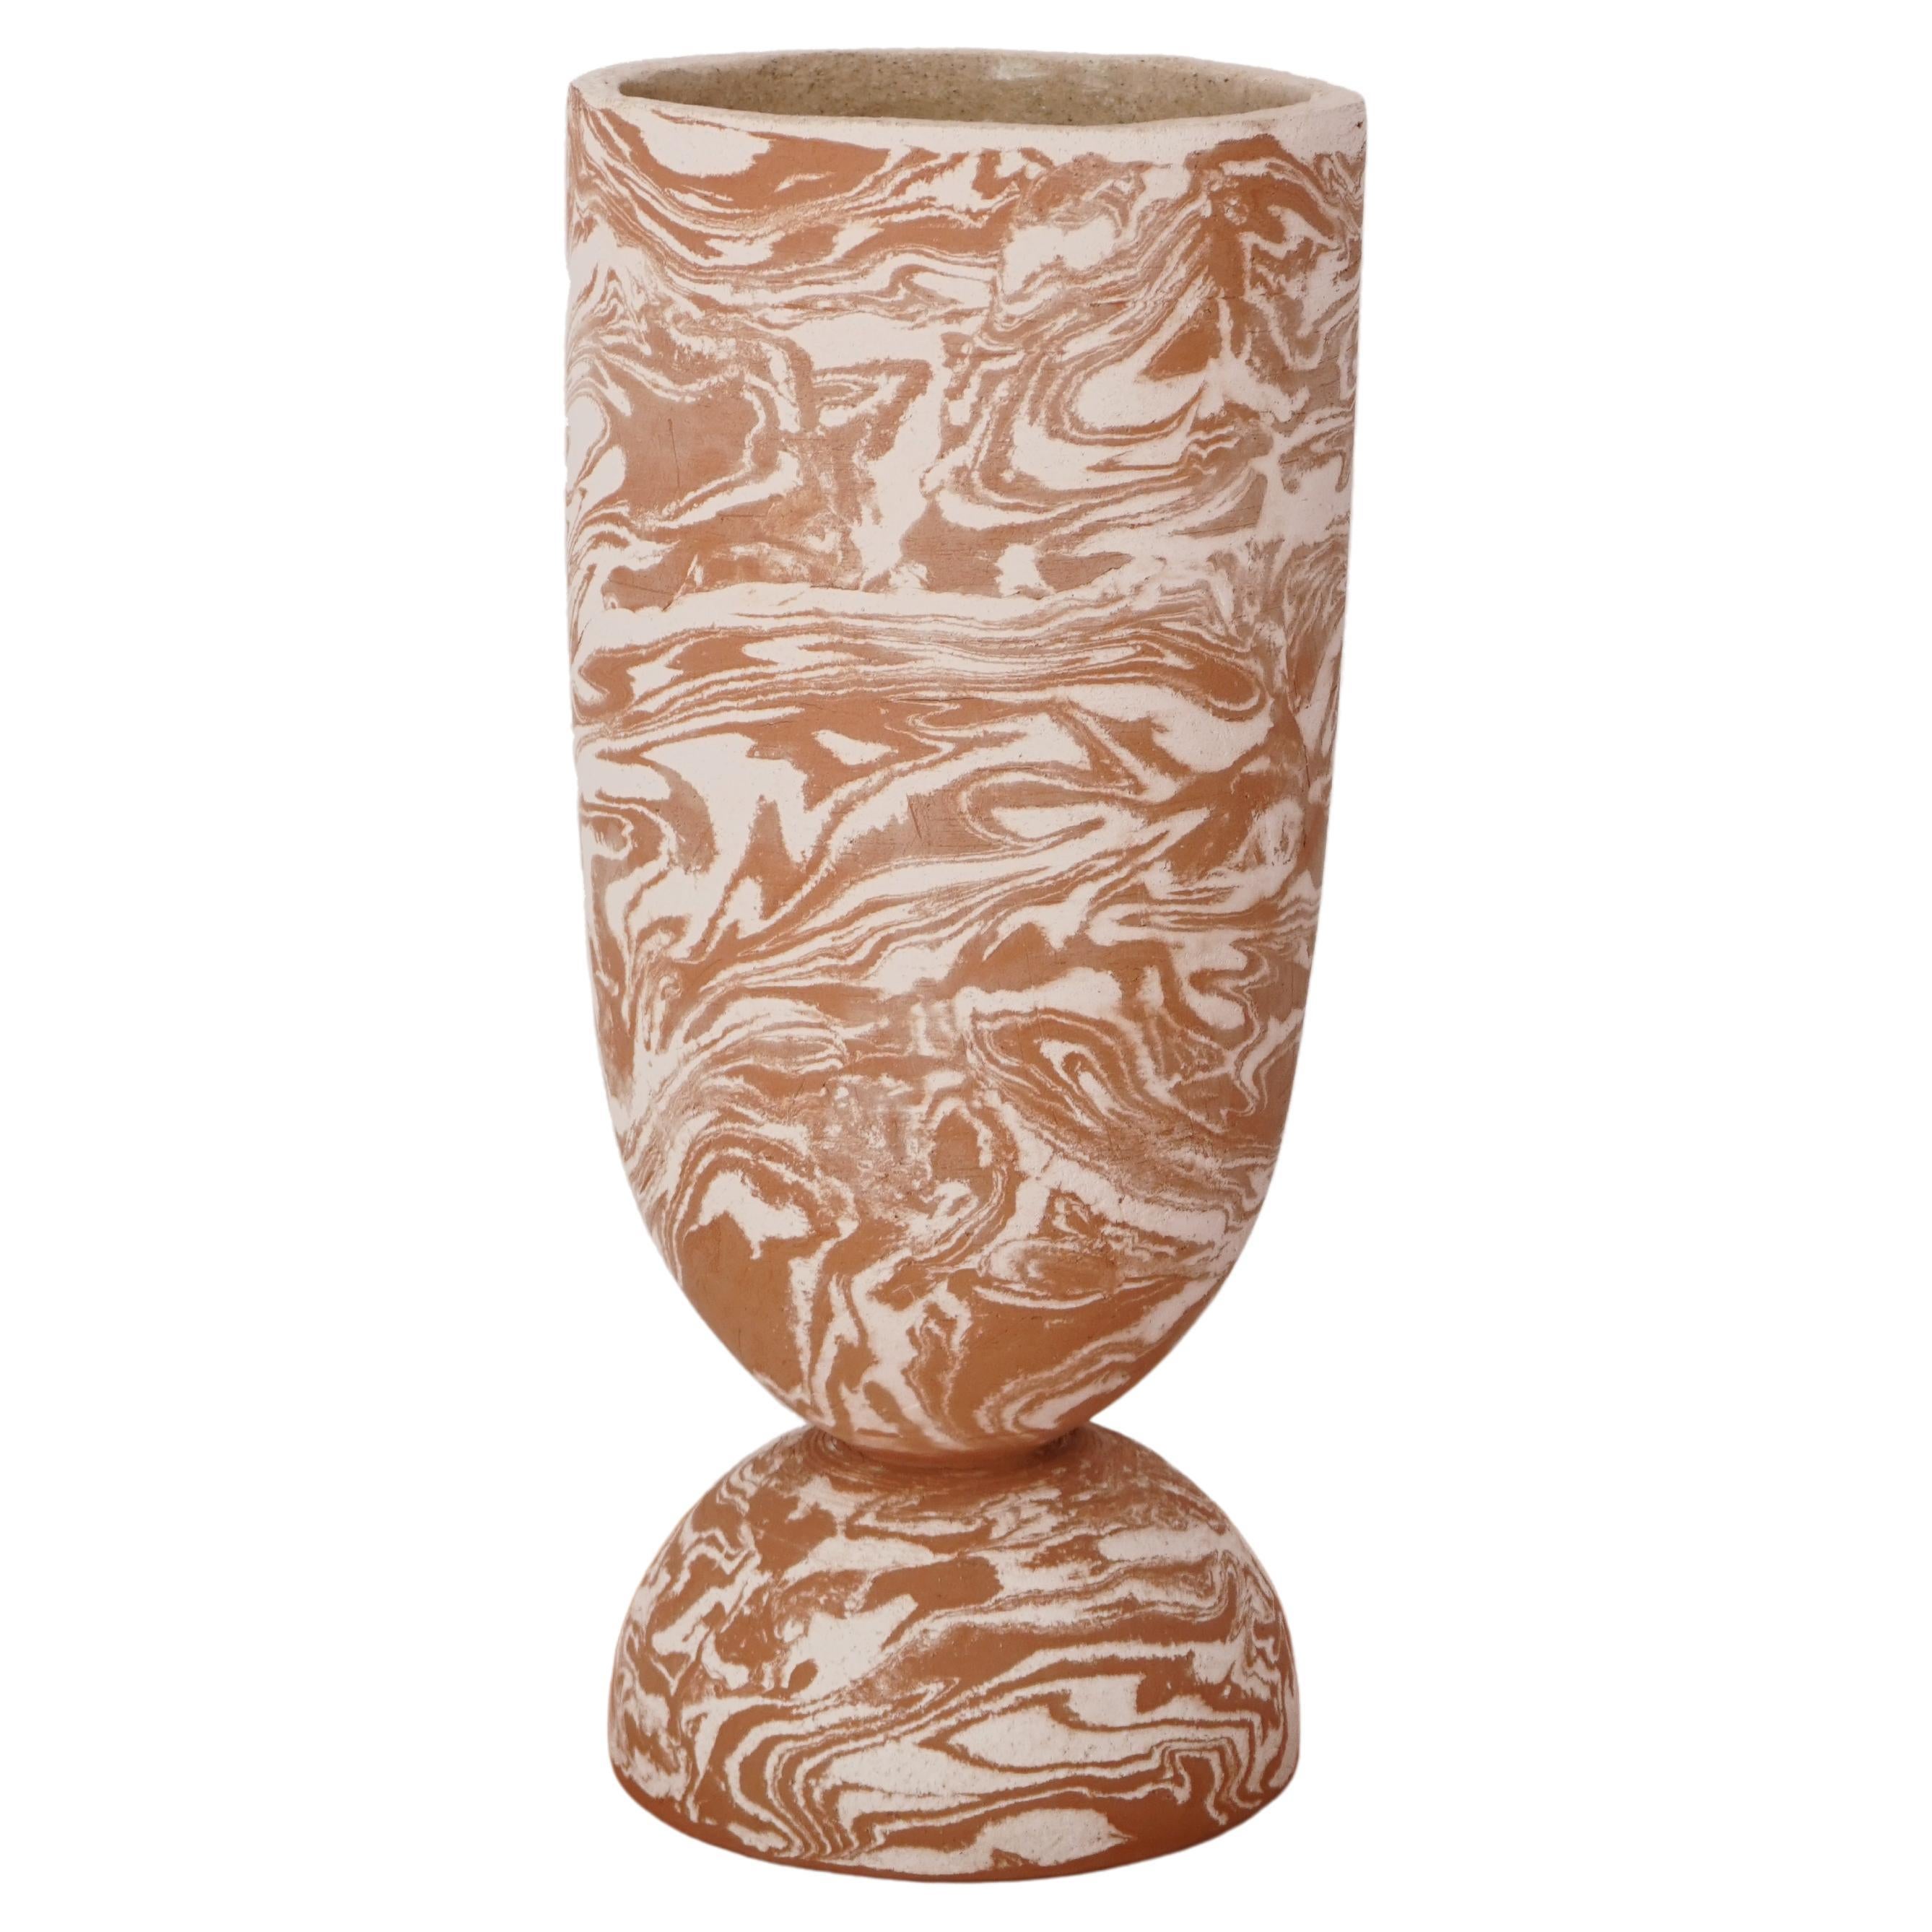 Tall Santa Vase made in Spain with Hand Marbled White and Terracotta Clay. For Sale